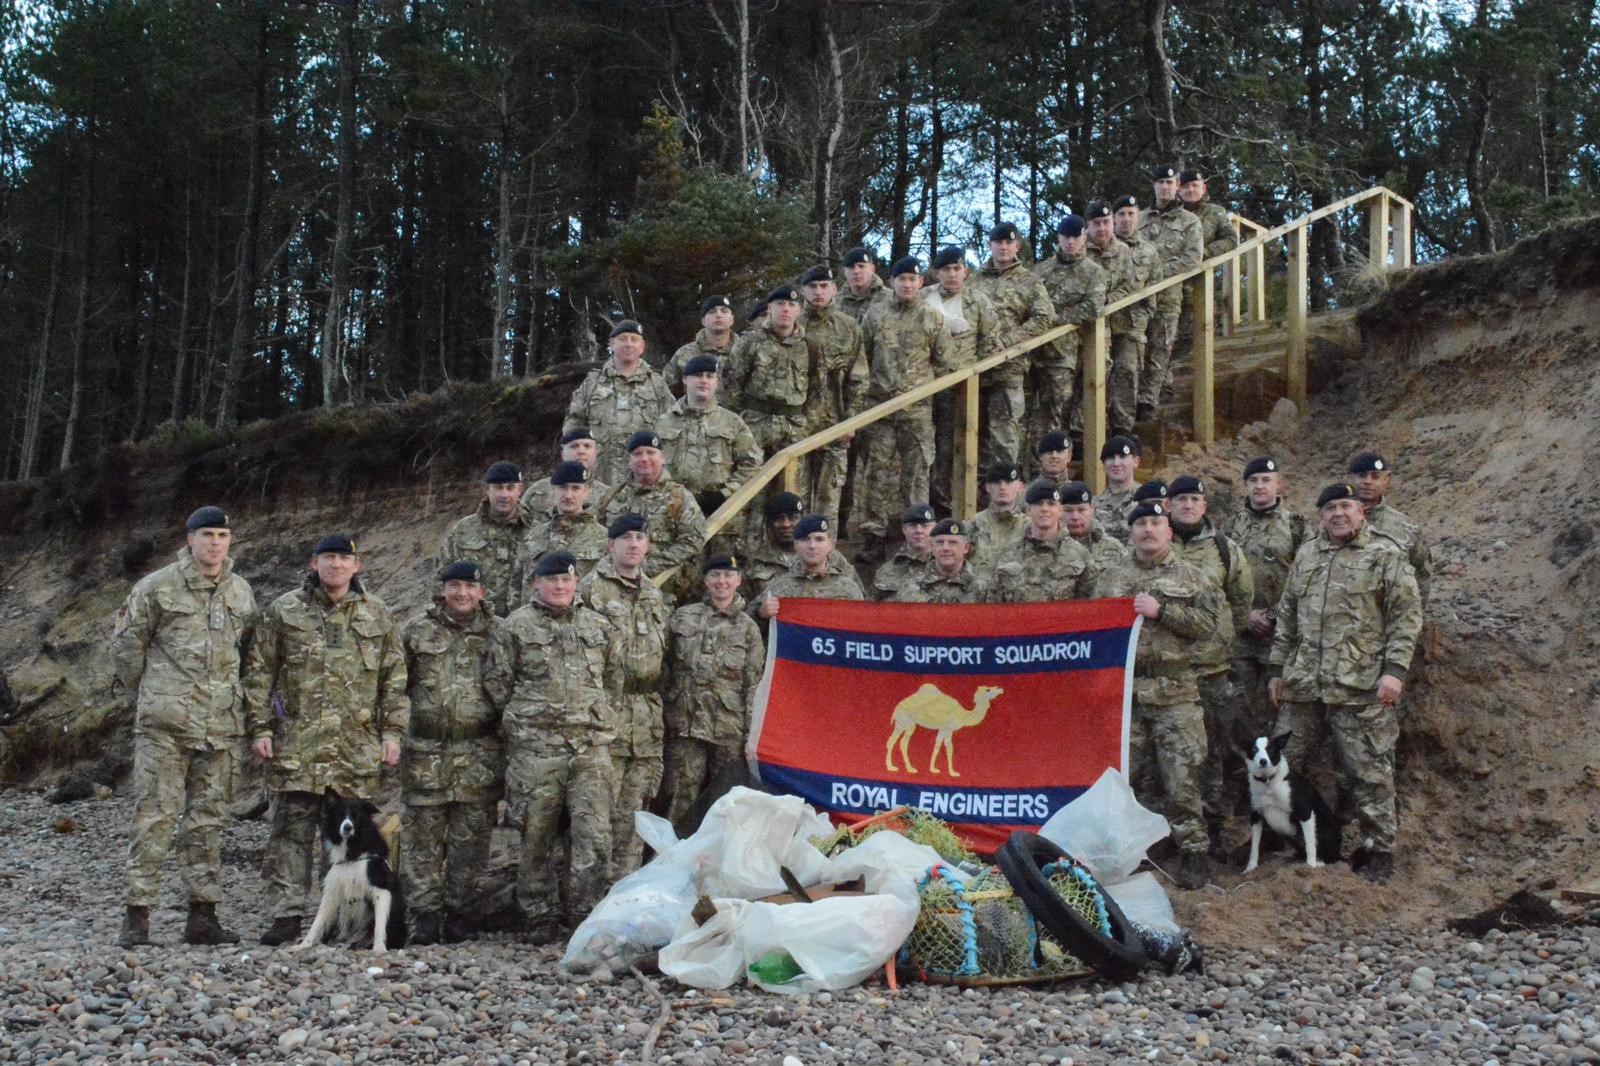 Personnel from 39 Engineer Regiment on the beach near Kinloss Barracks.